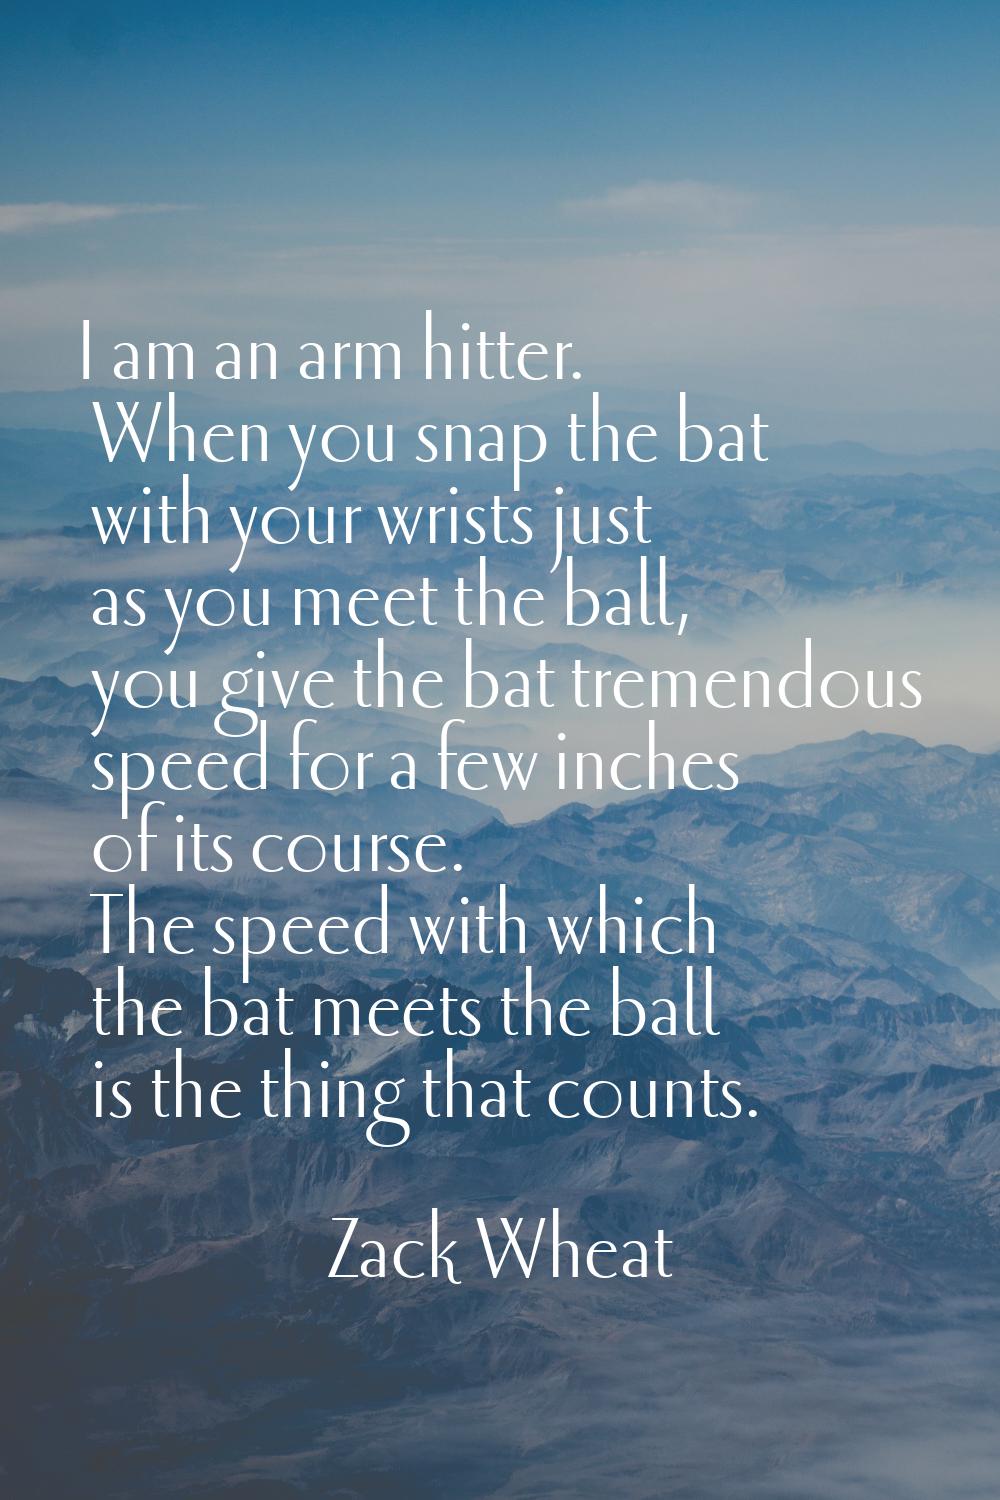 I am an arm hitter. When you snap the bat with your wrists just as you meet the ball, you give the 